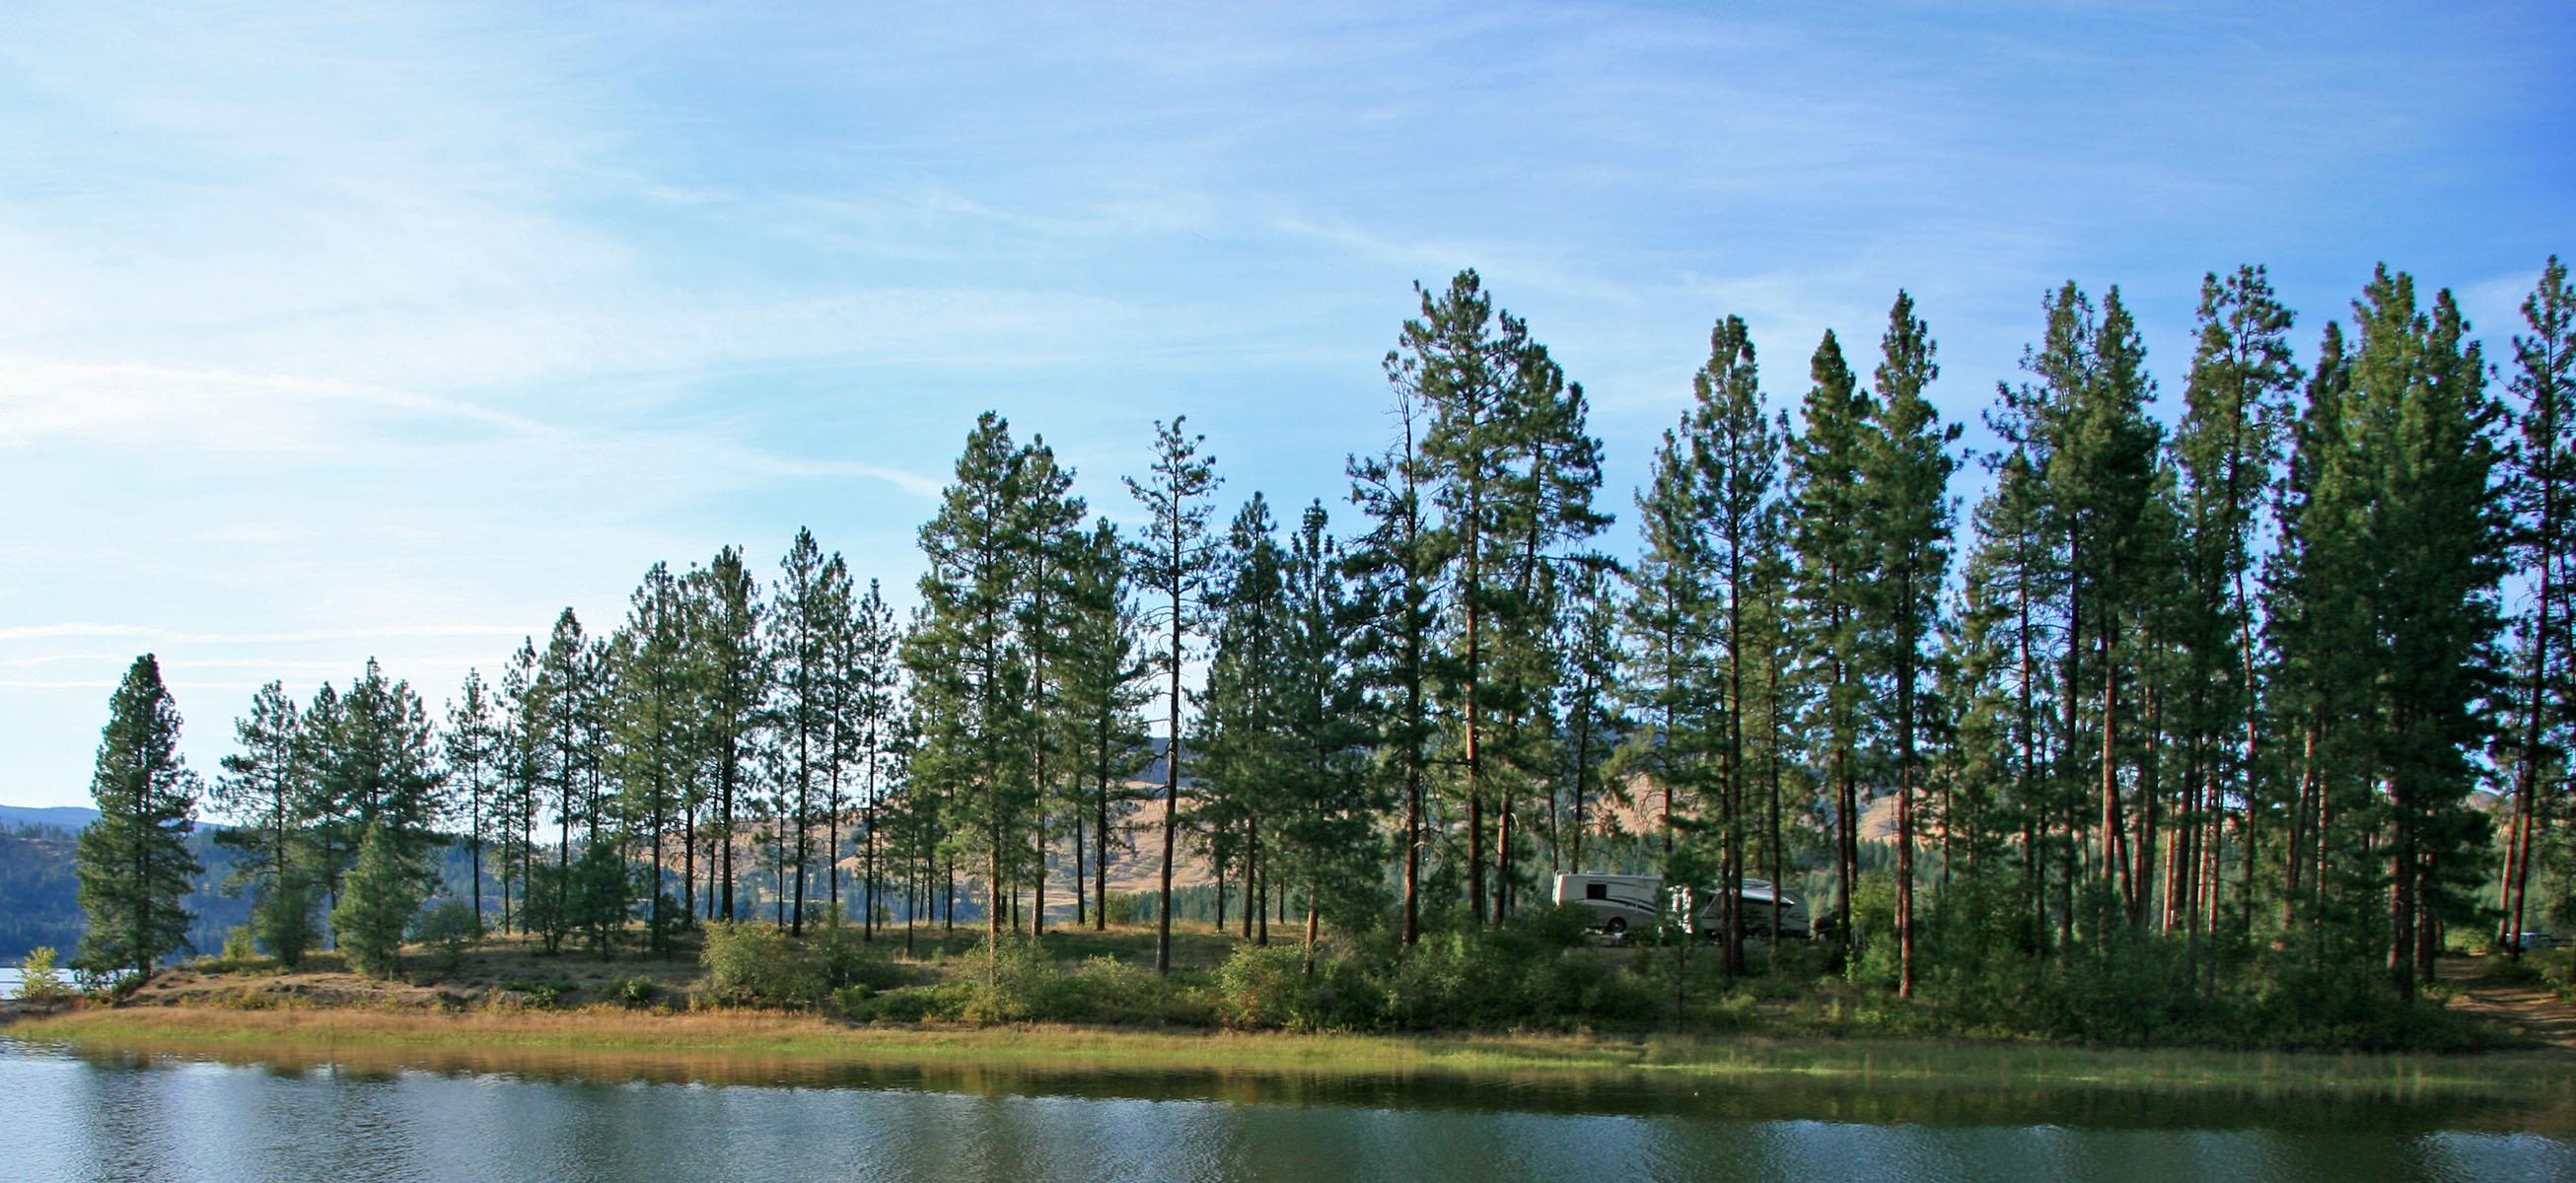 a peninsula of land with tall pines and campsites scattered among them